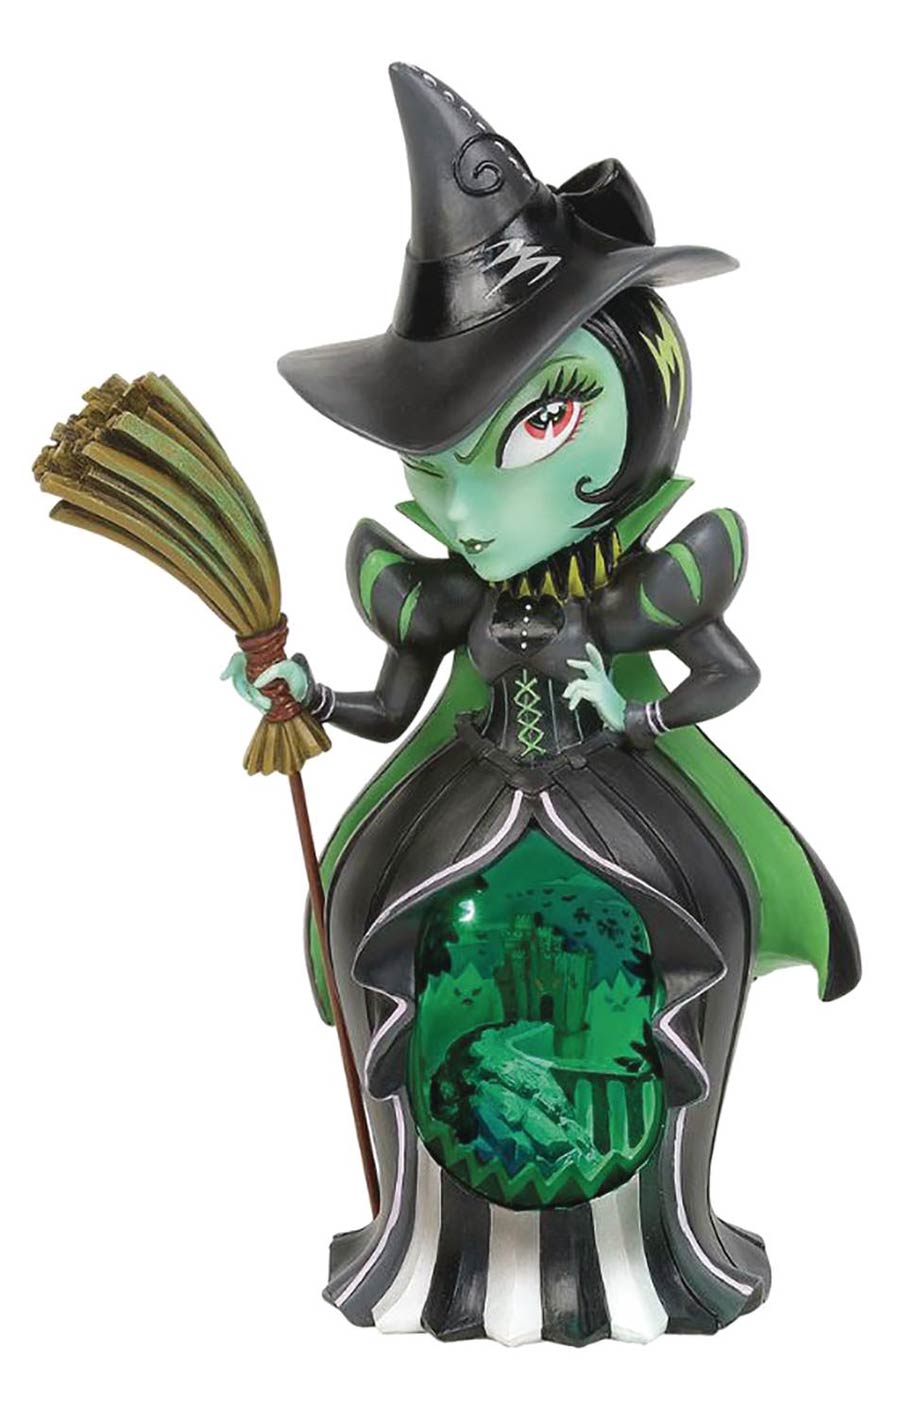 World Of Miss Mindy Wizard Of Oz Figurine - Wicked Witch Deluxe